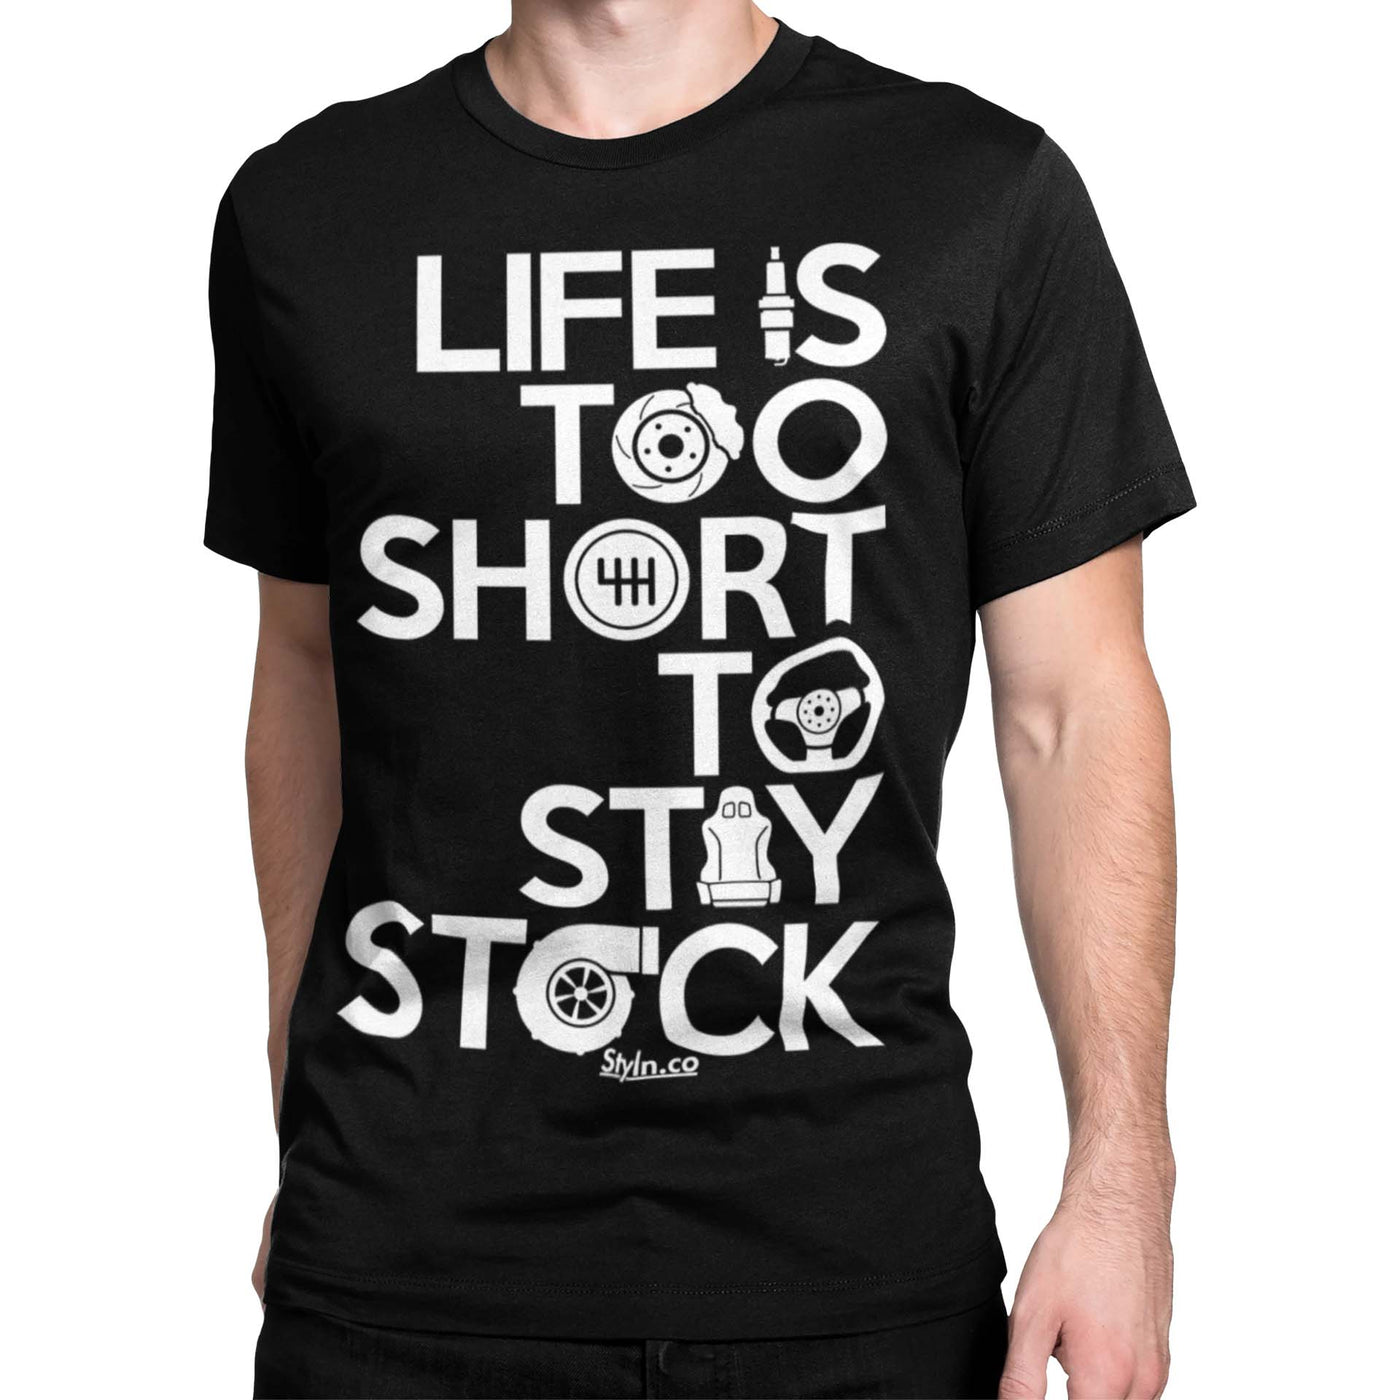 LIFE IS TOO SHORT TO STAY STOCK T-shirt